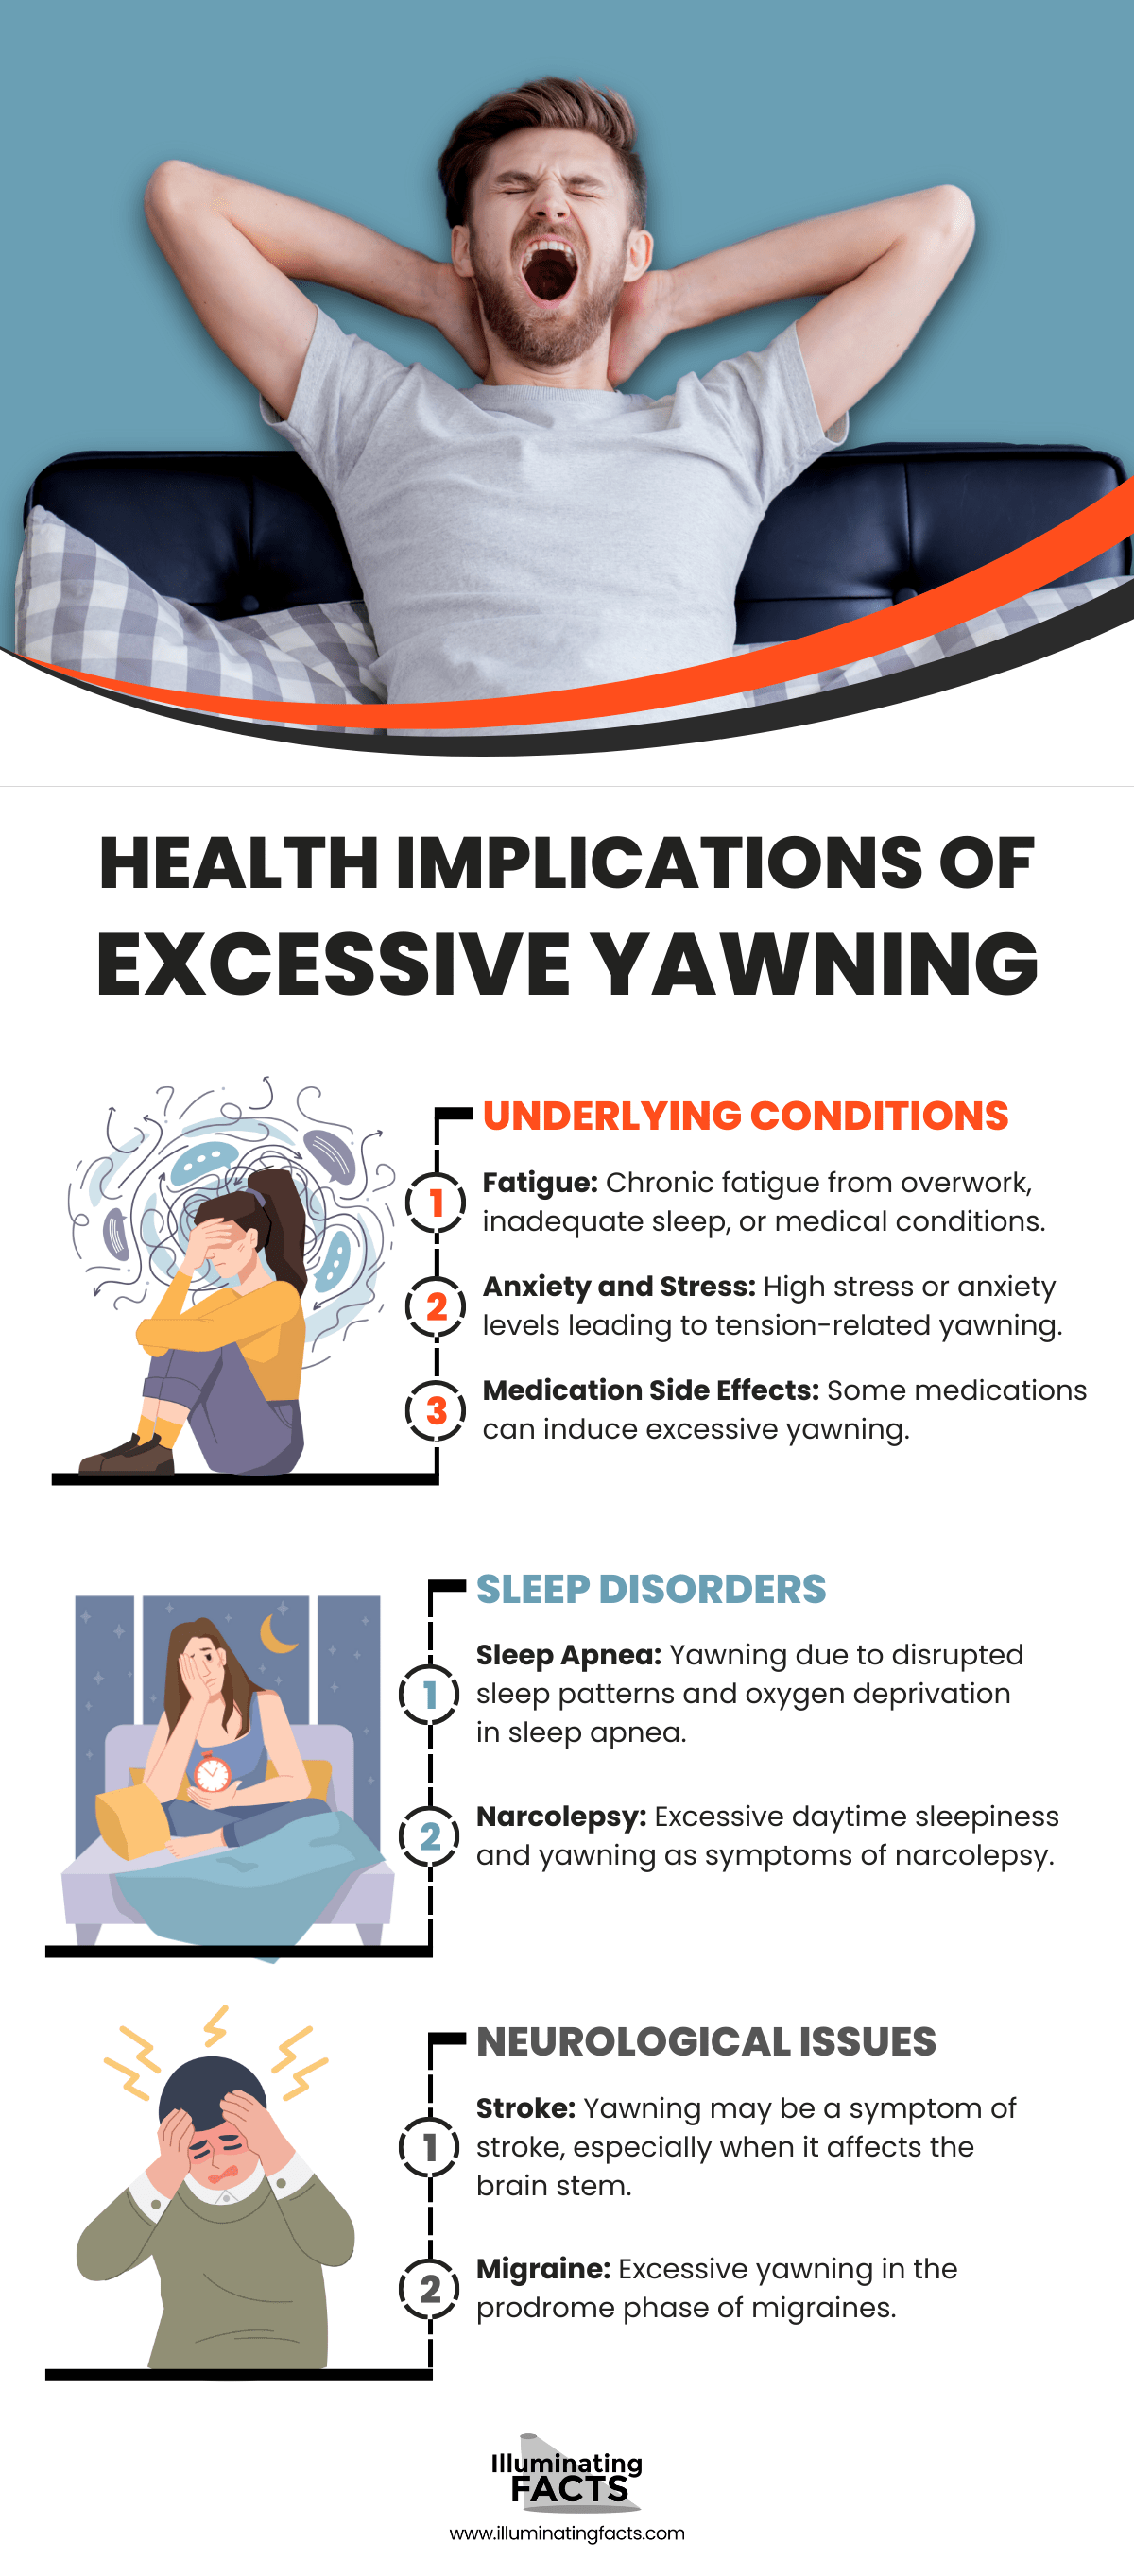 Health Implications of Excessive Yawning